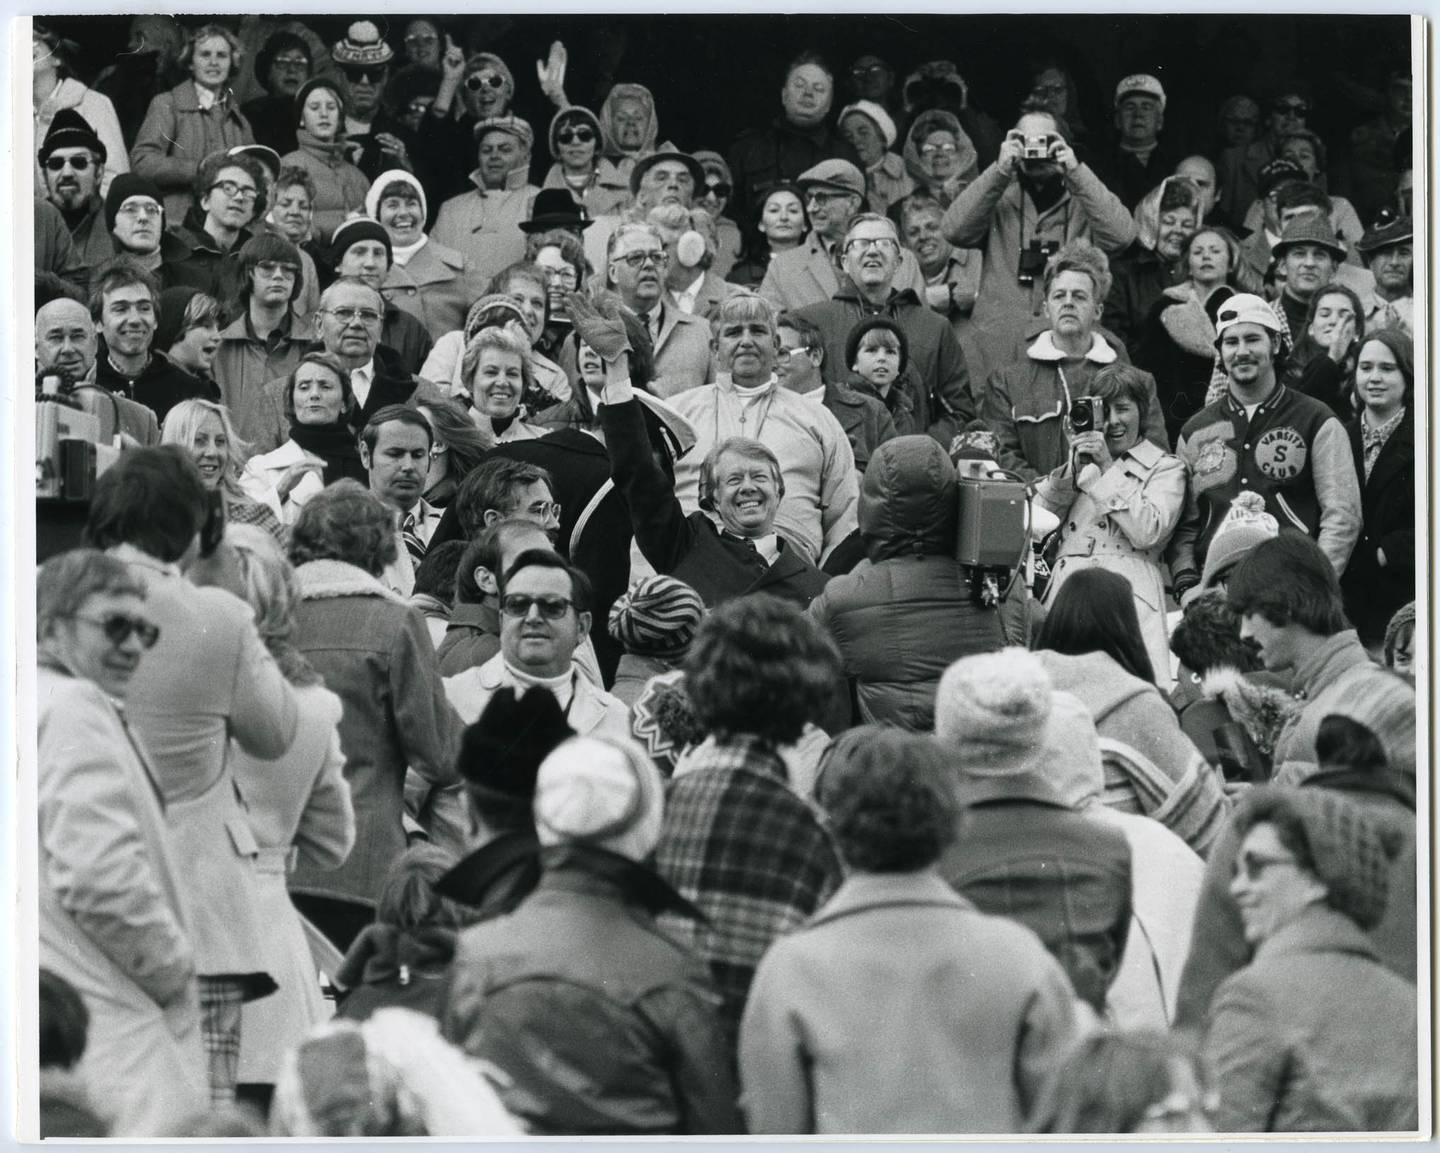 President Jimmy Carter, center, and his wife Rosalynn Carter join fans at Navy-Marine Corps Memorial Stadium in Annapolis on Nov. 12, 1977, for the game between the Navy Midshipmen and Georgia Tech. Navy beat the Yellow Jackets, 20-16.